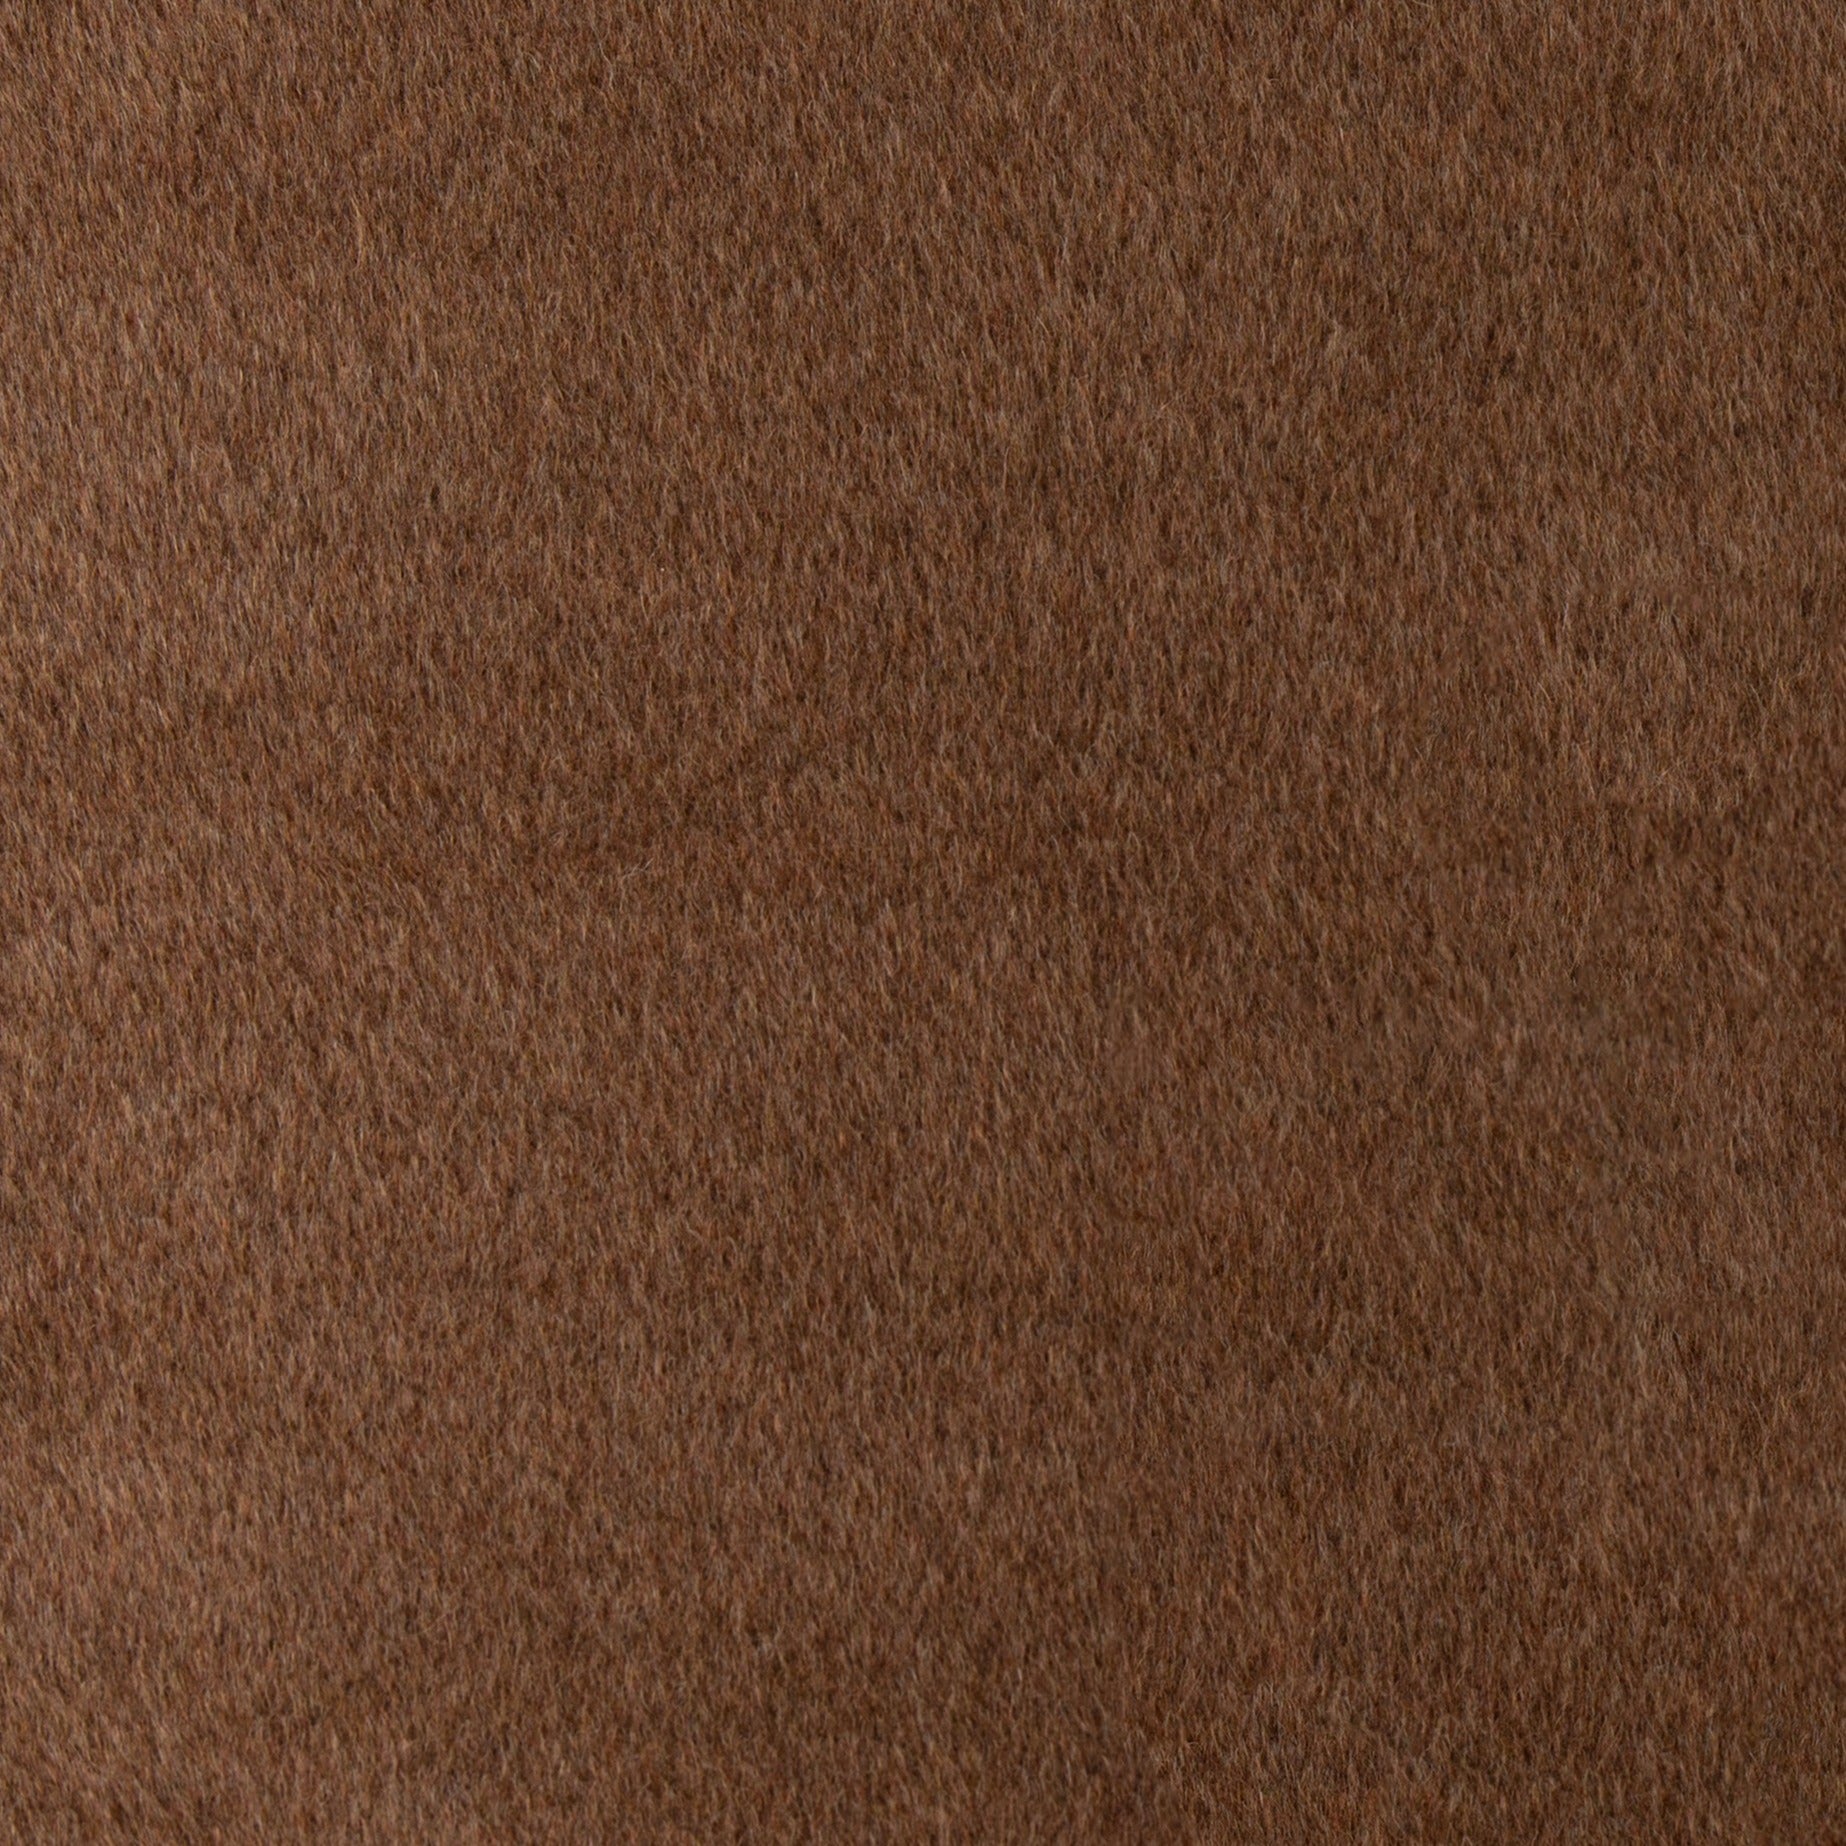 Brown plush fabric close-up - texture Stock Photo by ©DNKSTUDIO 55787299